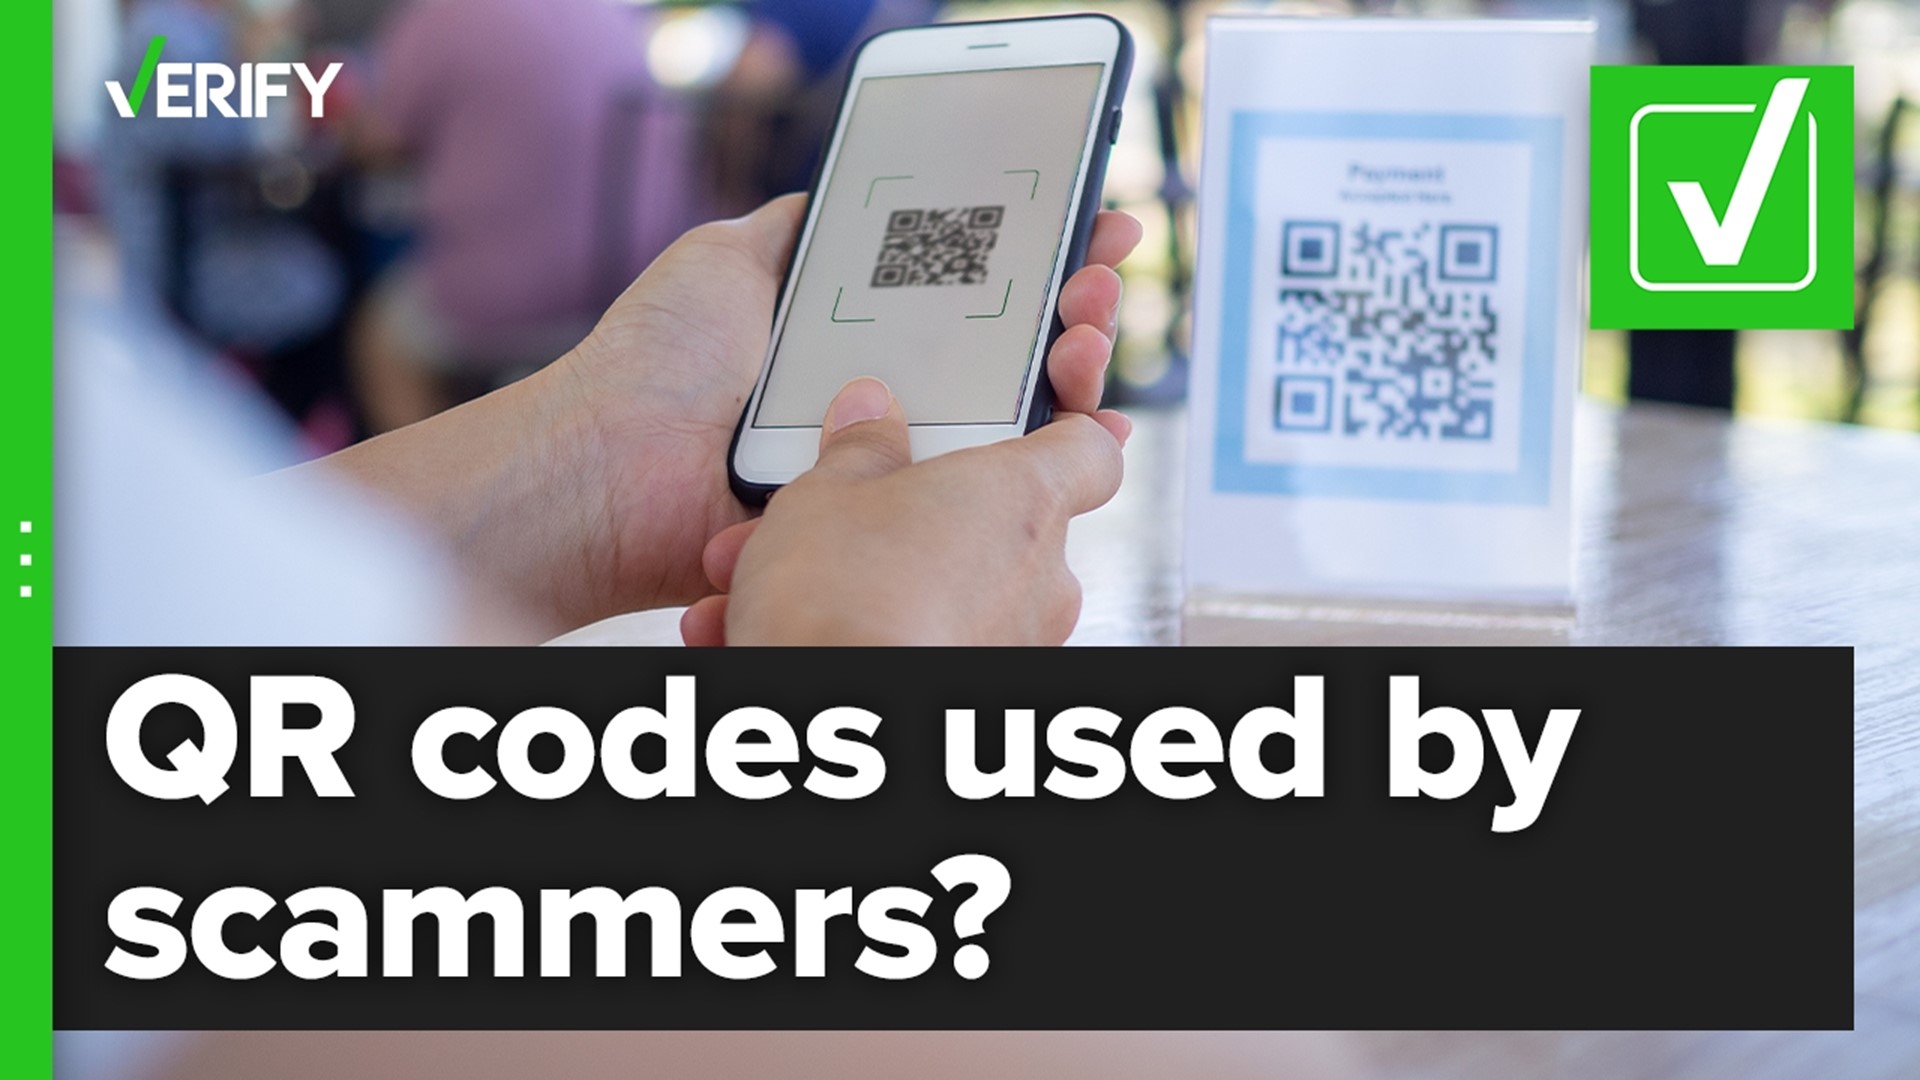 Can scammers use QR codes to steal your personal information? The VERIFY team confirms this is true.